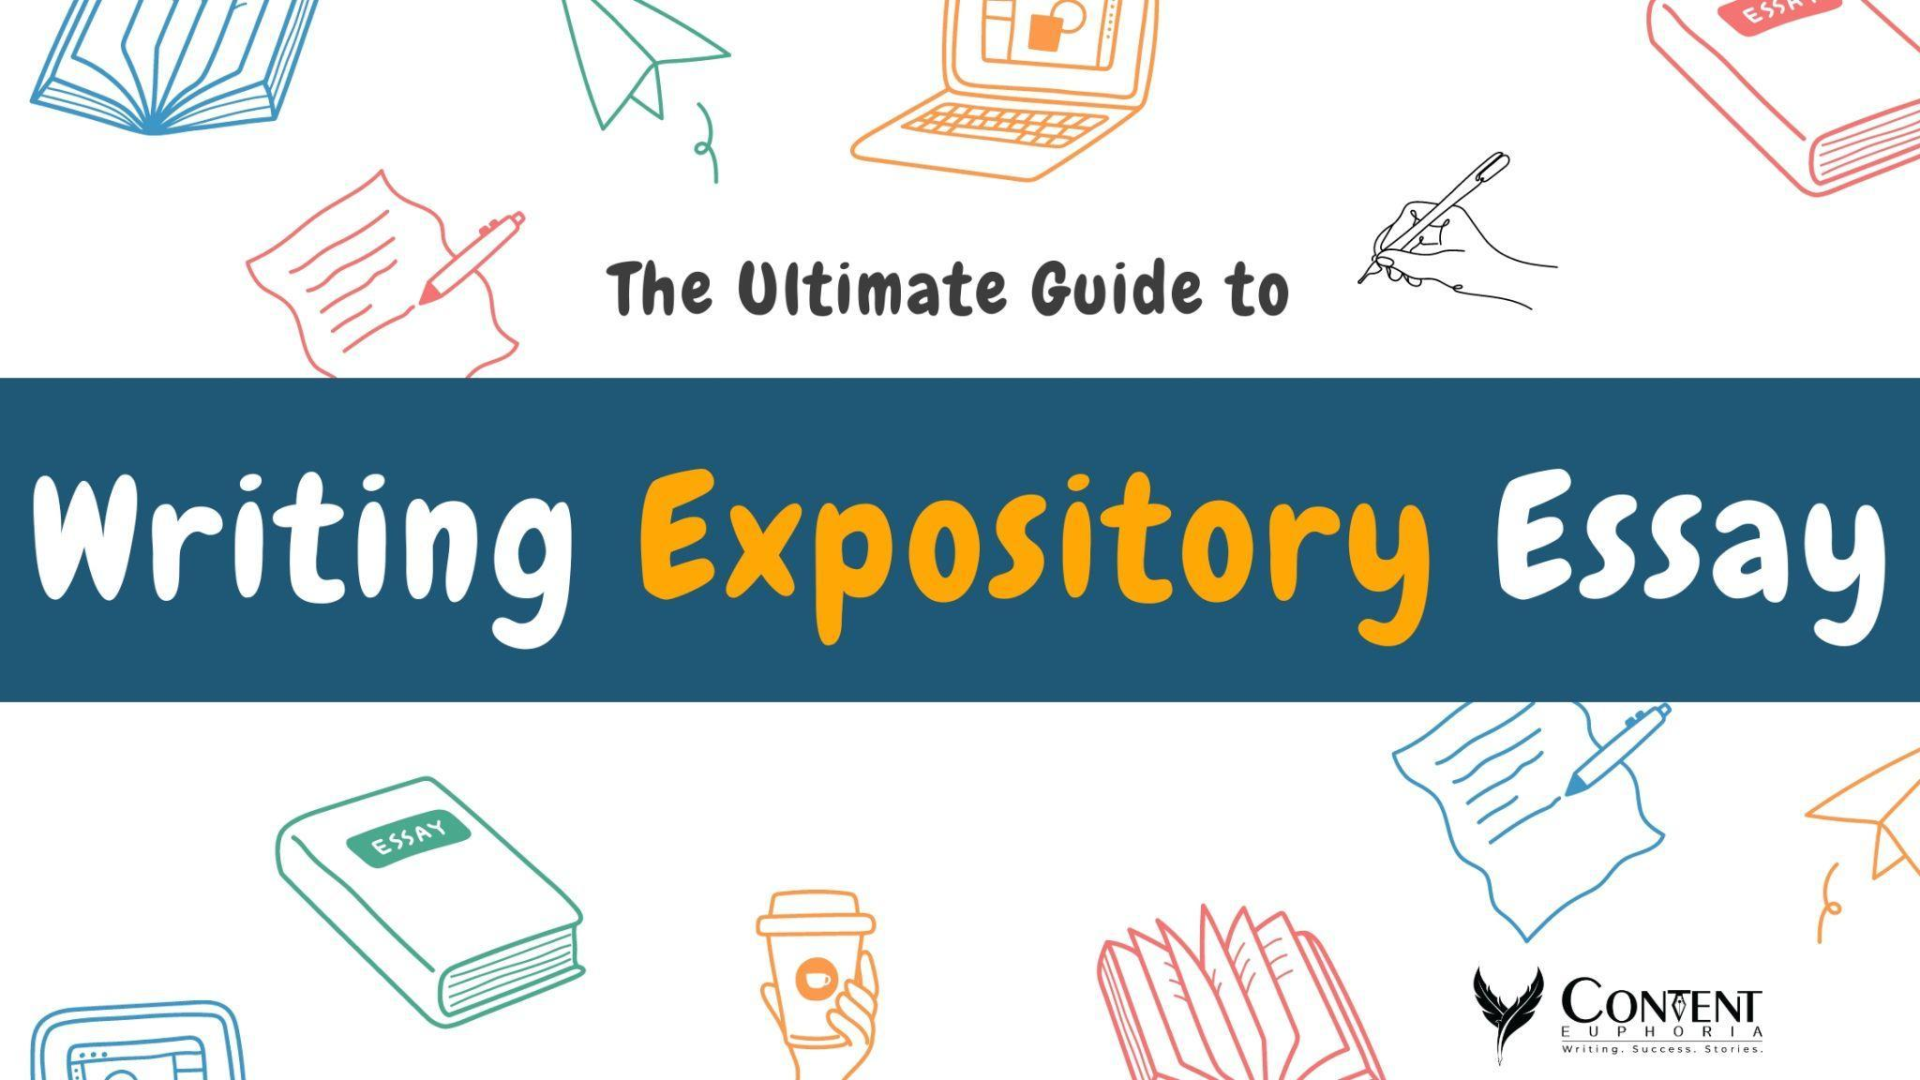 A Comprehensive Step-by-Step Guide to Writing Expository Essay